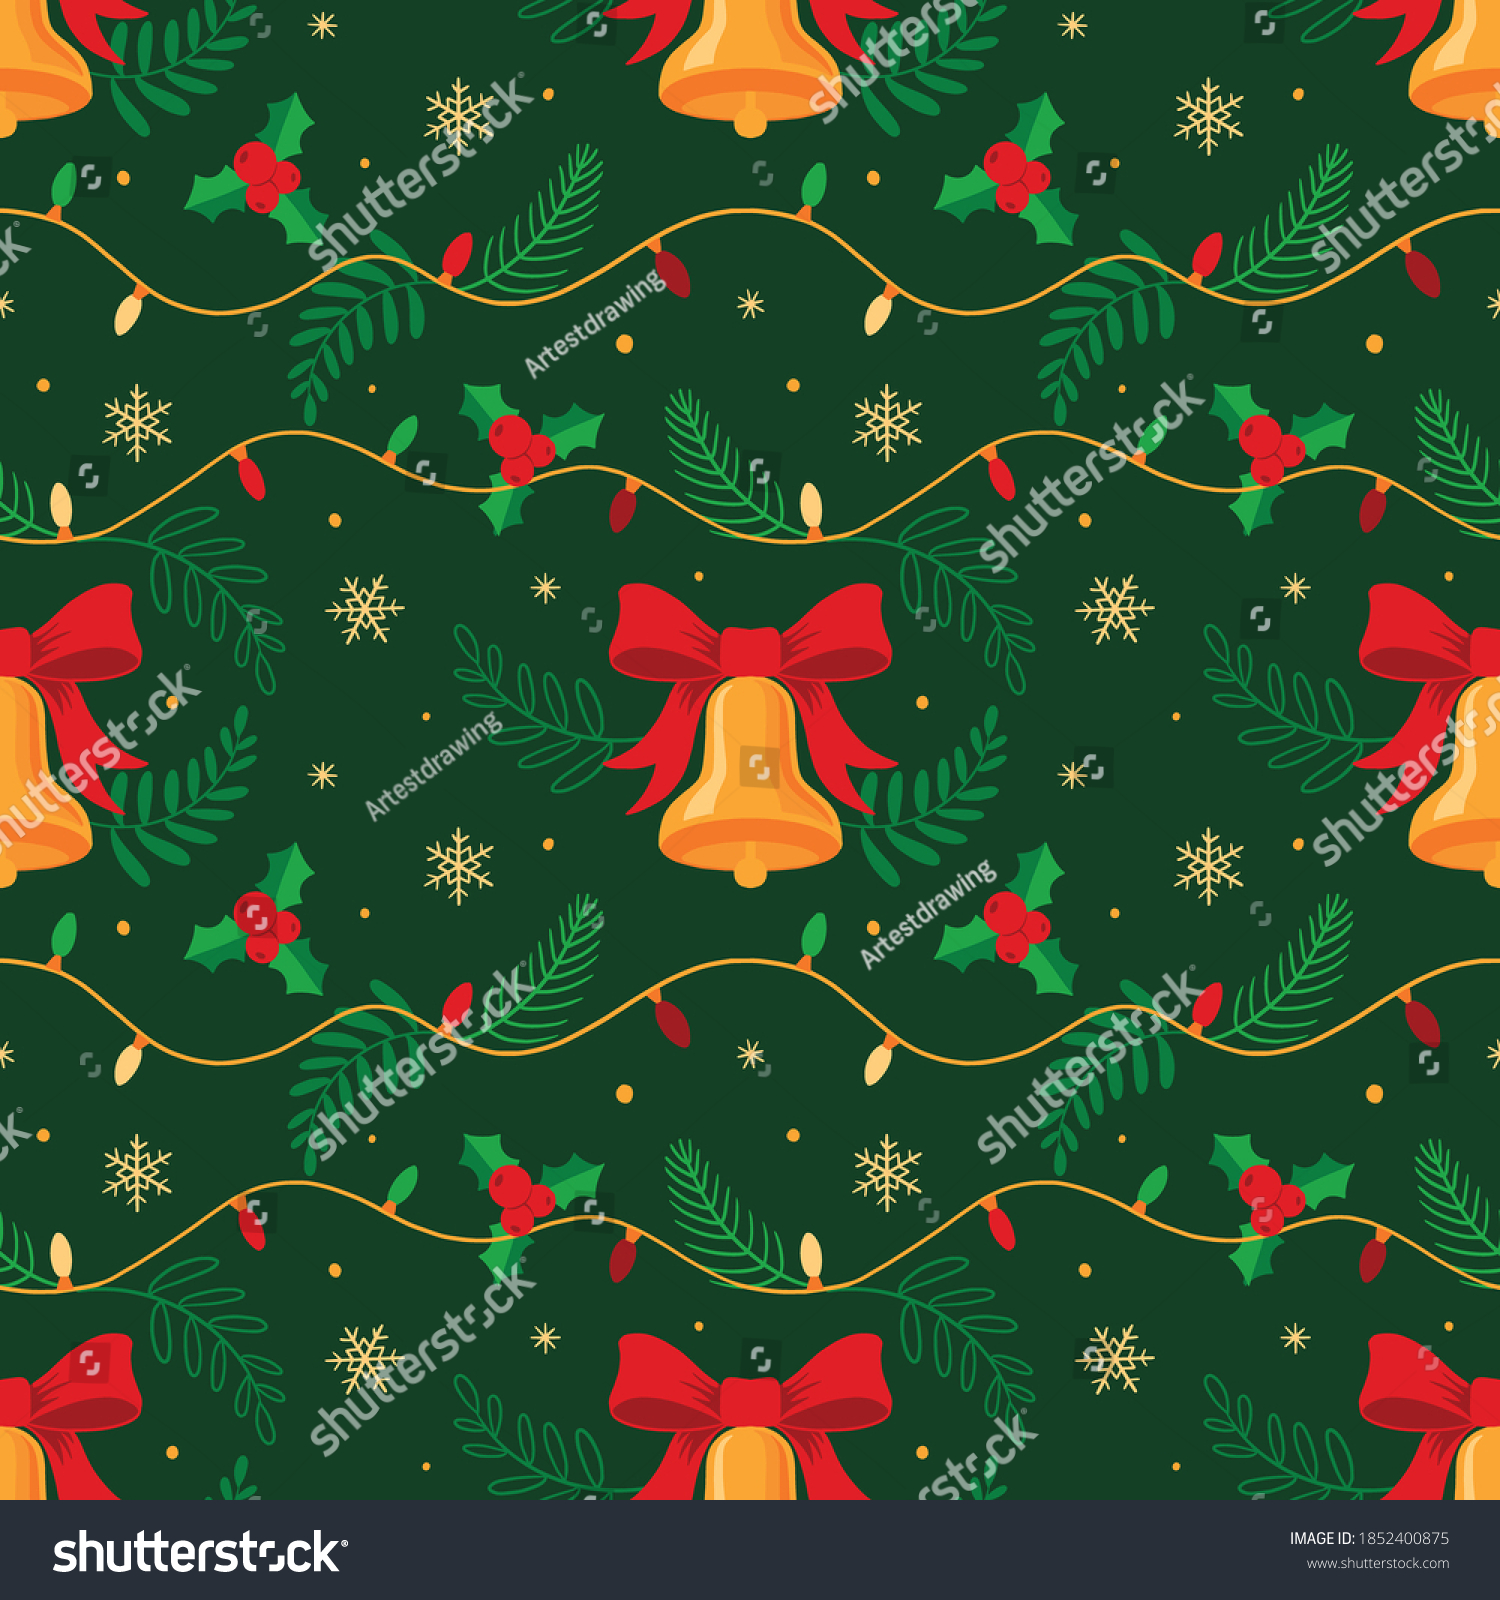 35,143 Christmas bell wallpaper Images, Stock Photos & Vectors ...